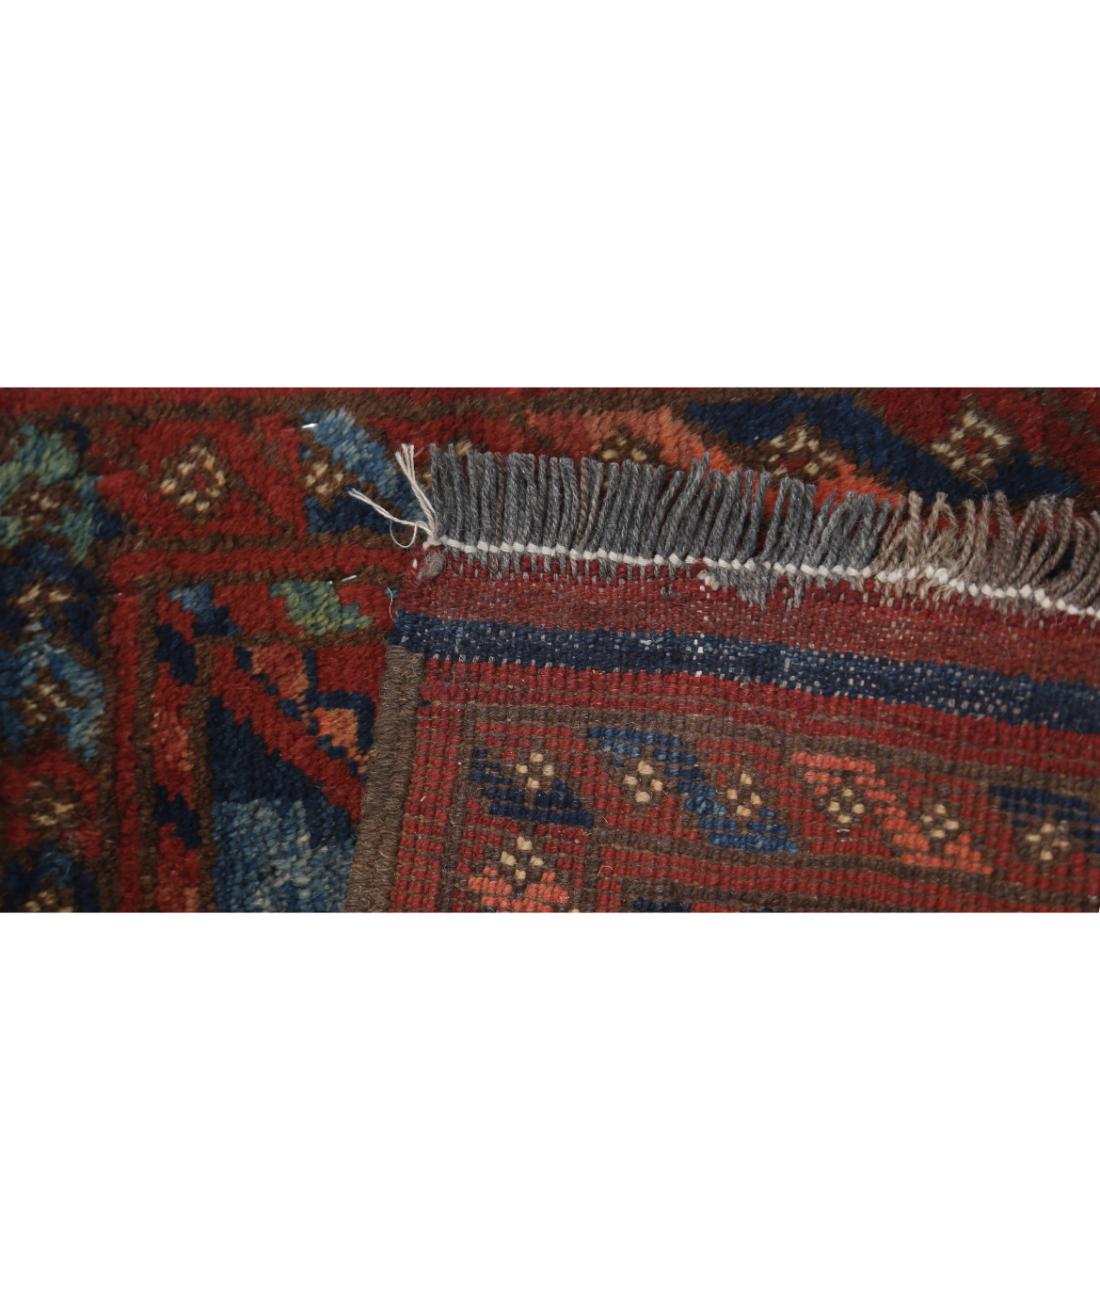 Afghan 1' 2" X 1' 2" Hand-Knotted Wool Rug 1' 2" X 1' 2" (36 X 36) / Rust / Blue